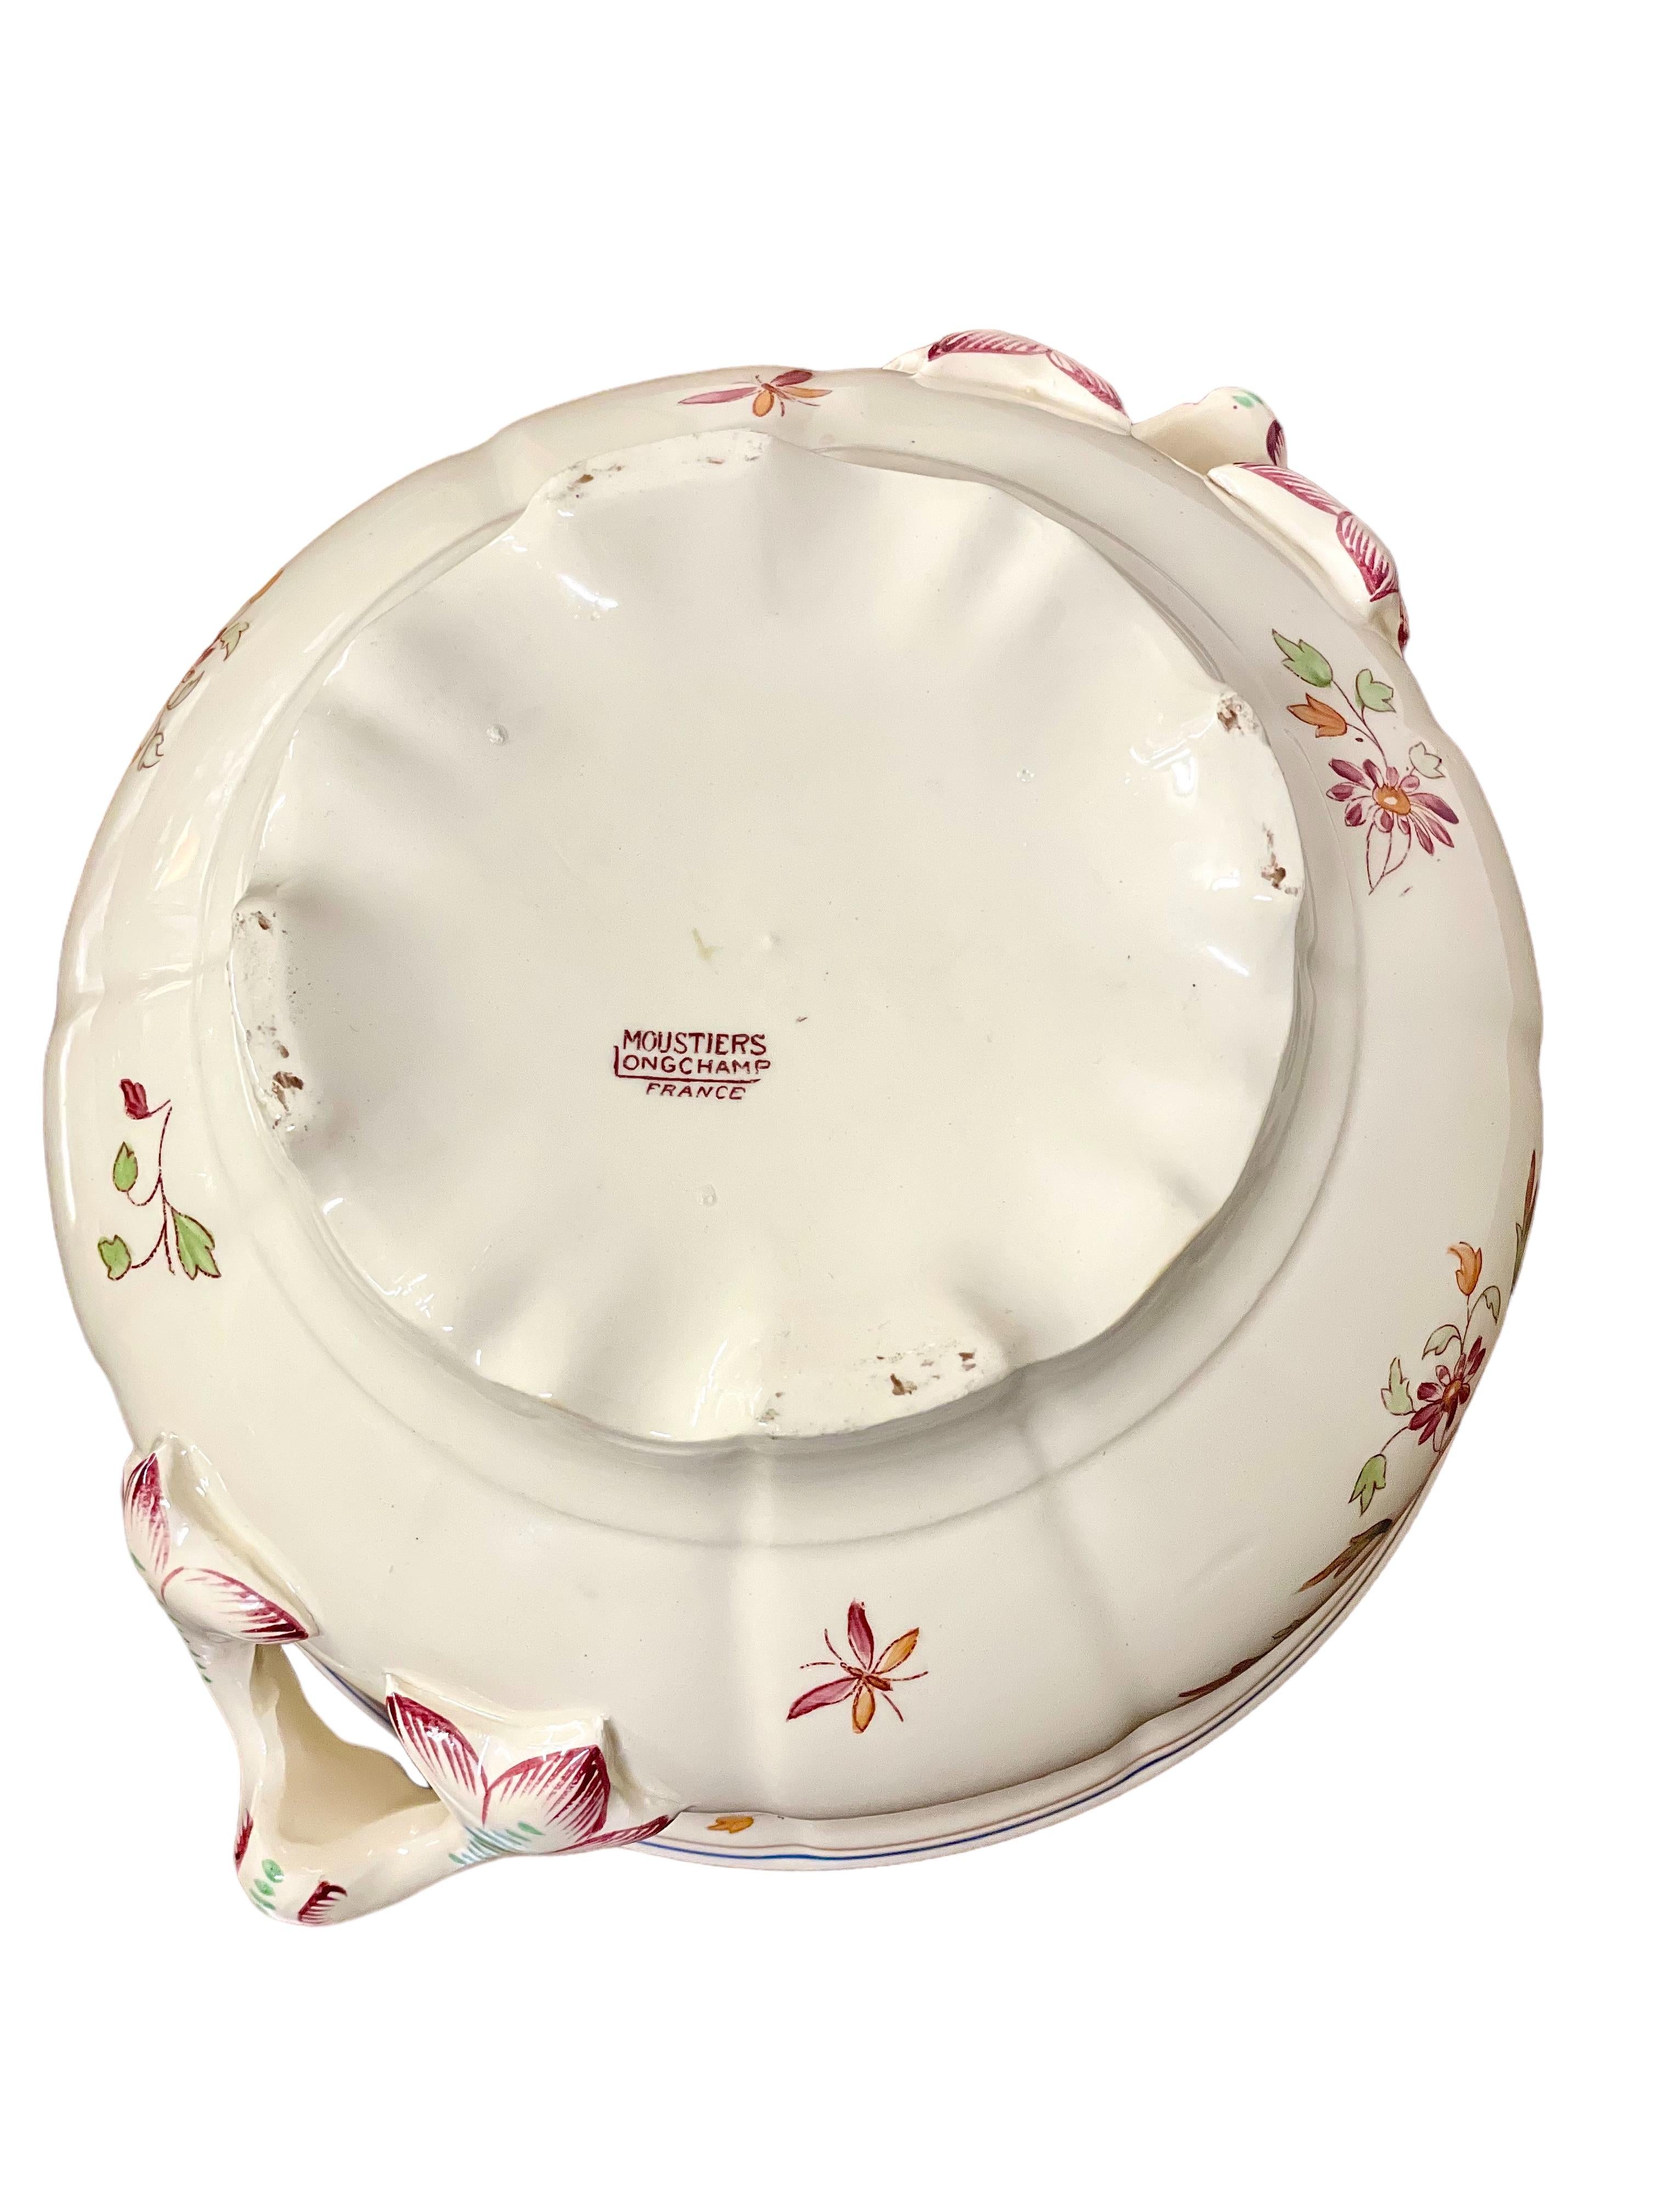 Moustiers by Longchamp French Faience Dinner Service for 12  For Sale 3